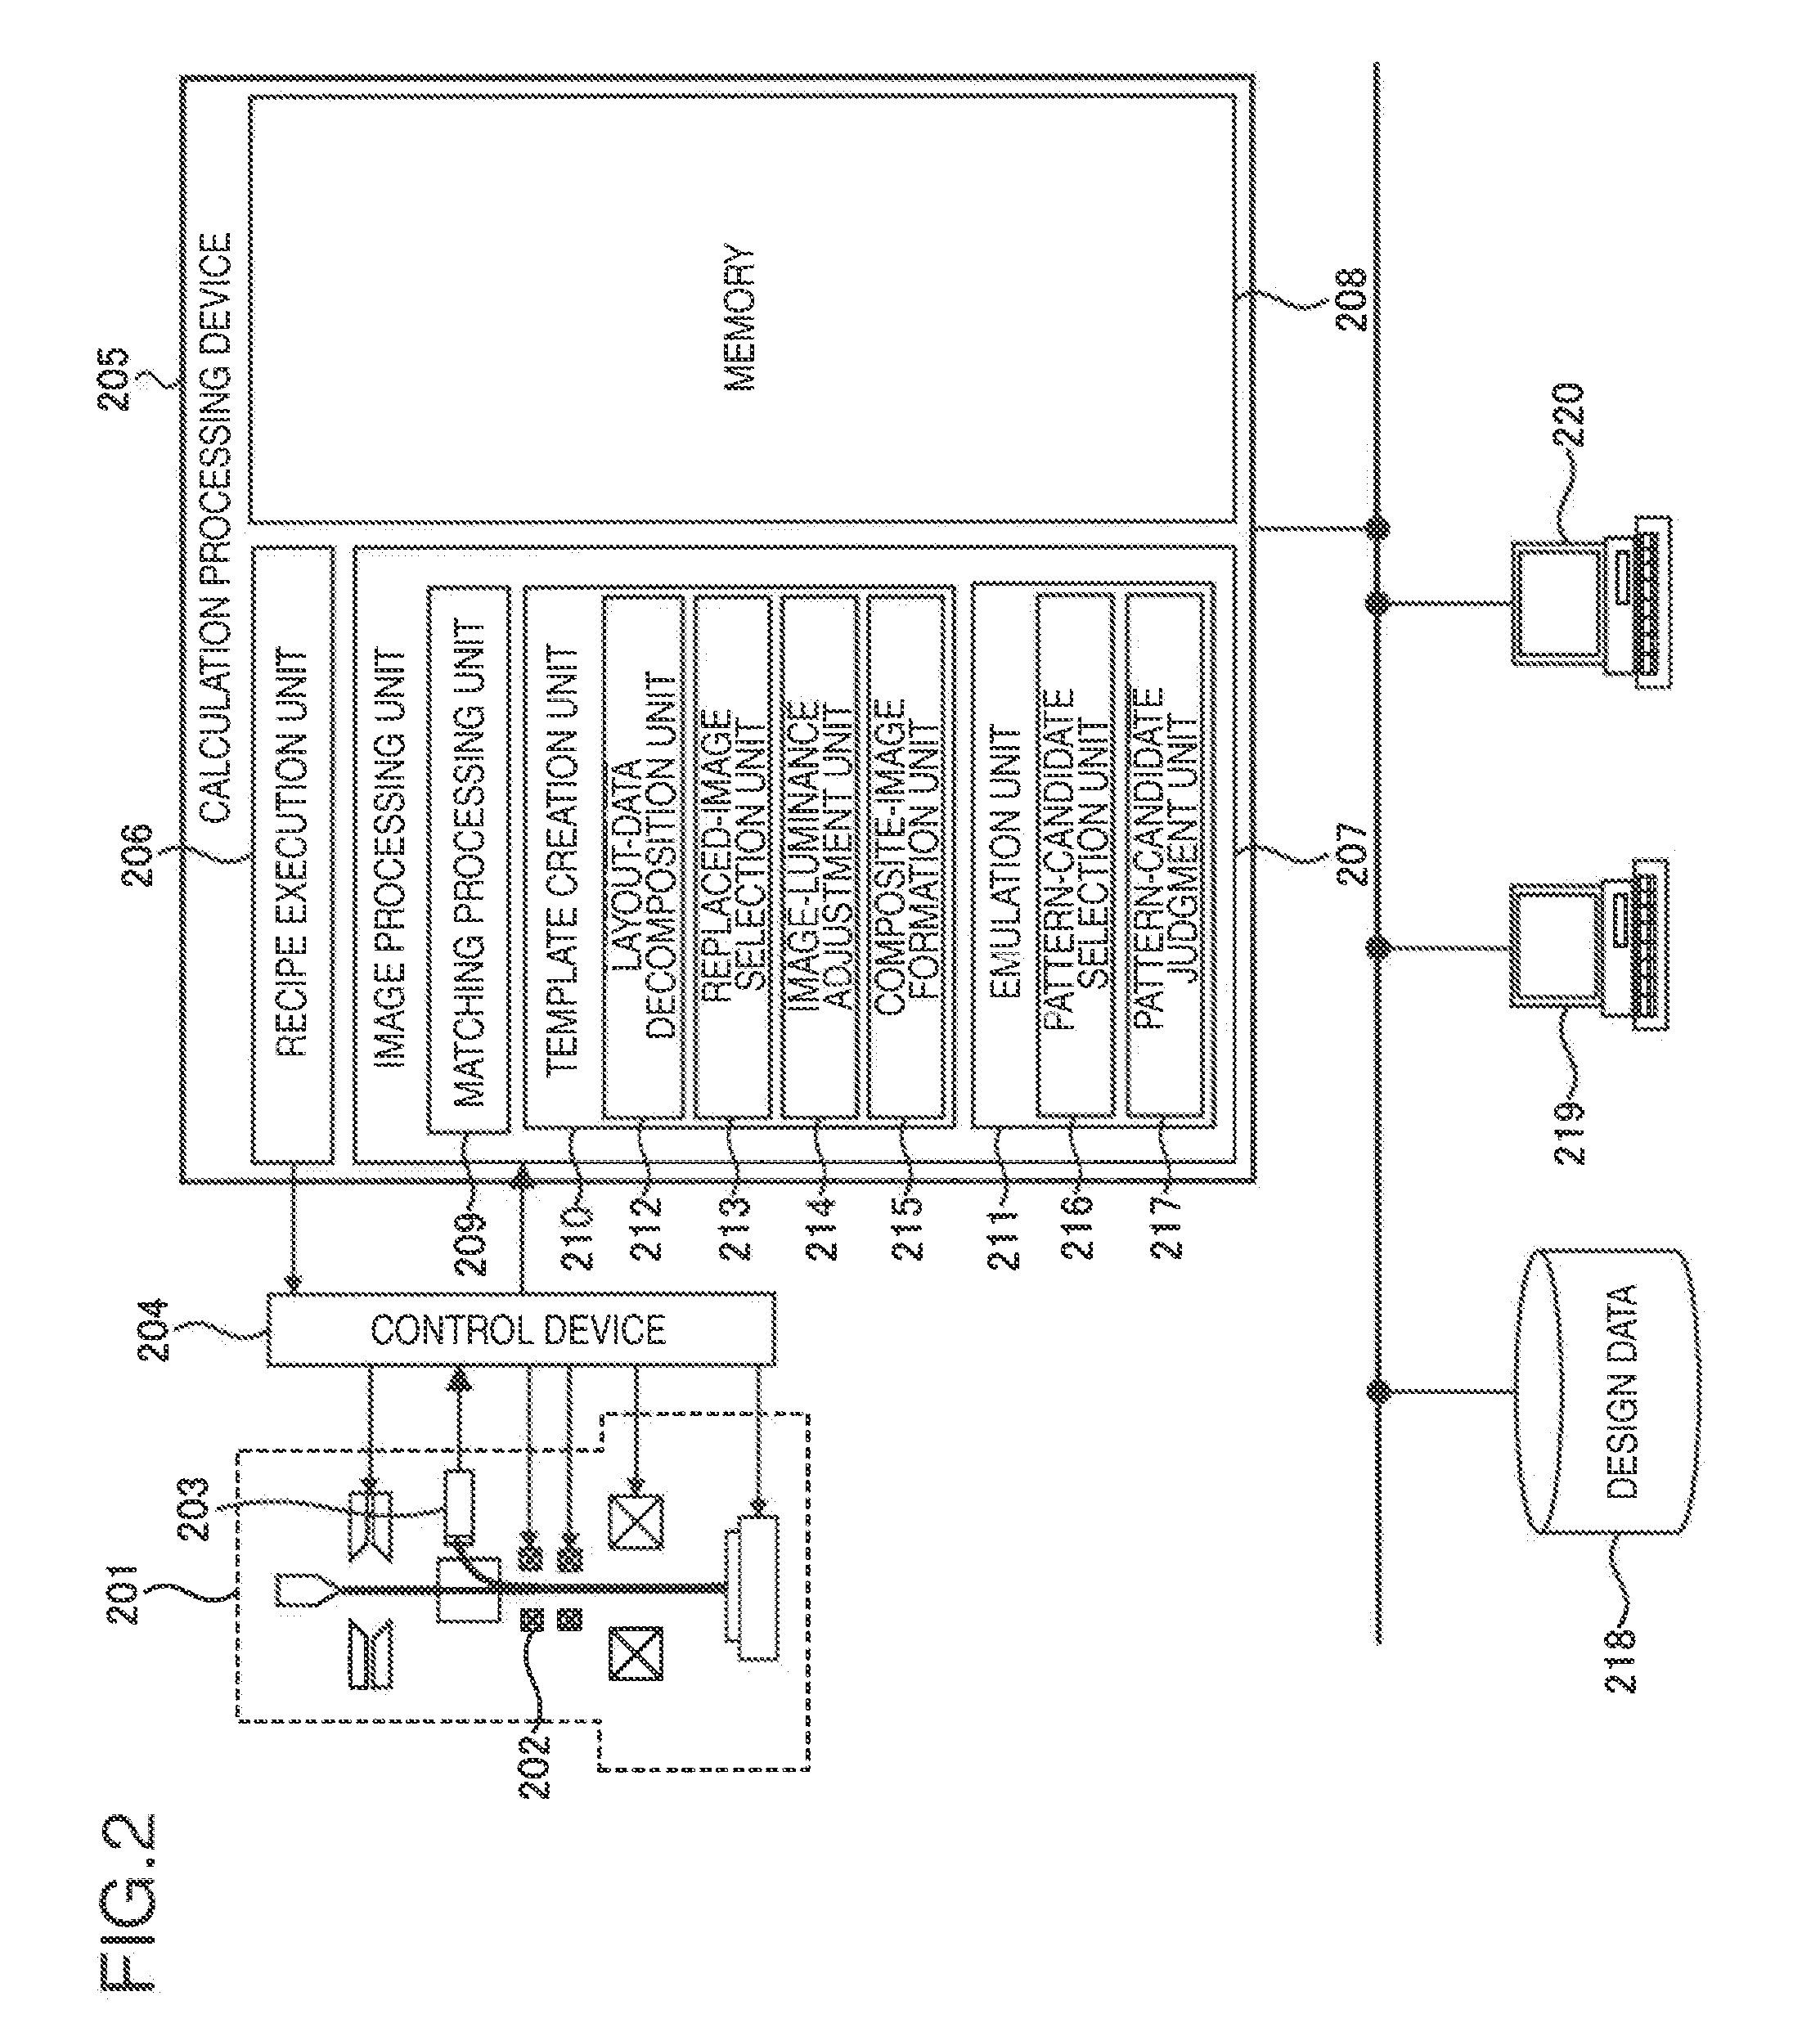 Image processing device and computer program for performing image processing